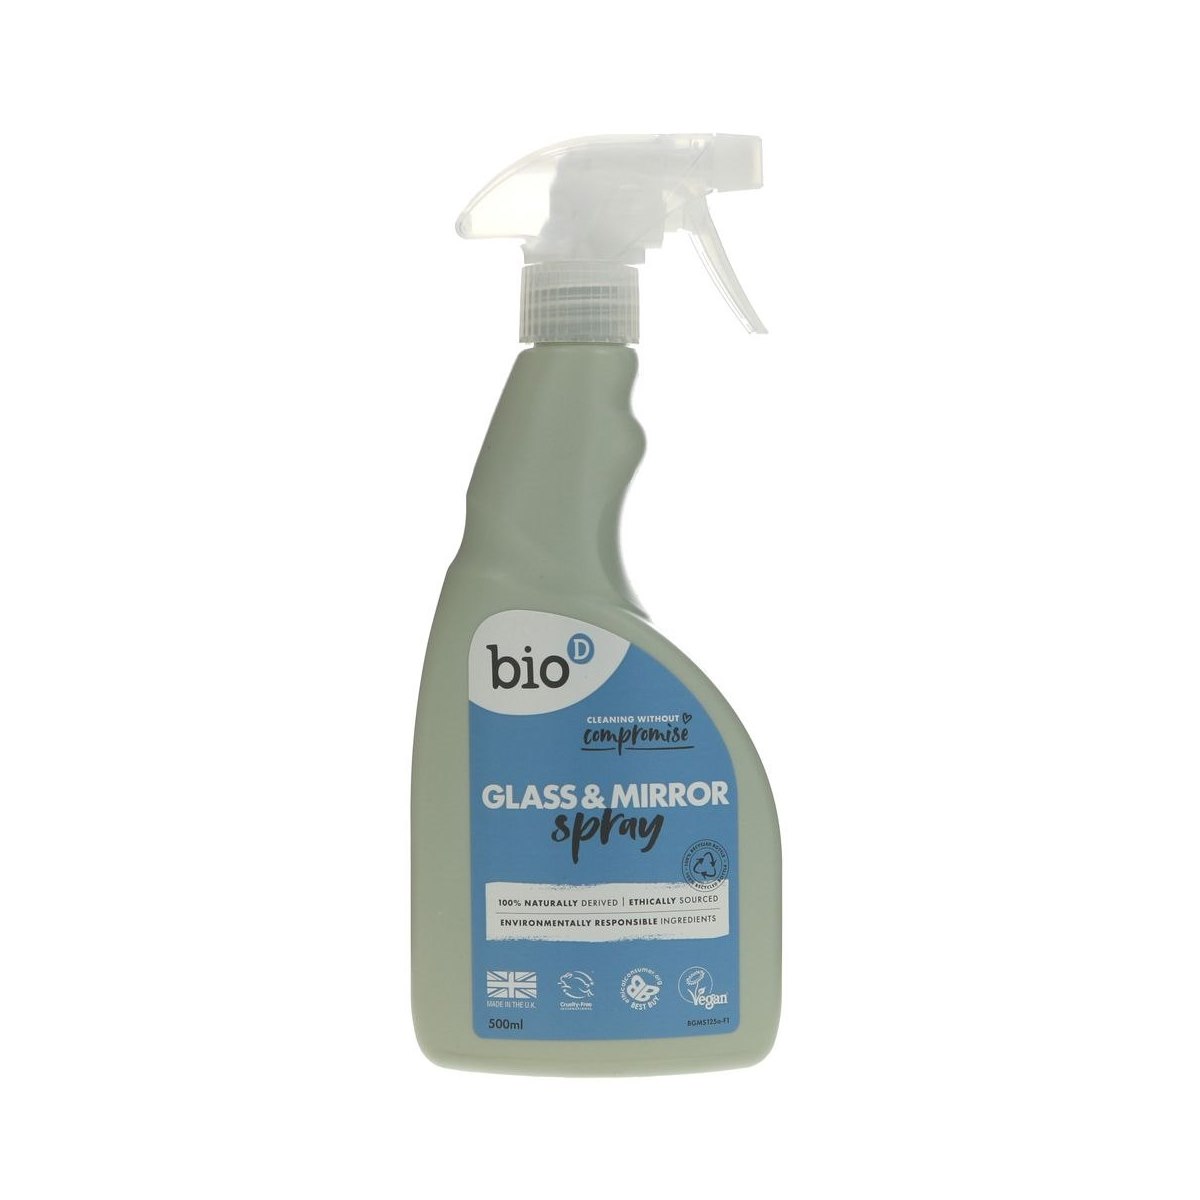 Bio-D Glass and Mirror Cleaner Spray 500ml